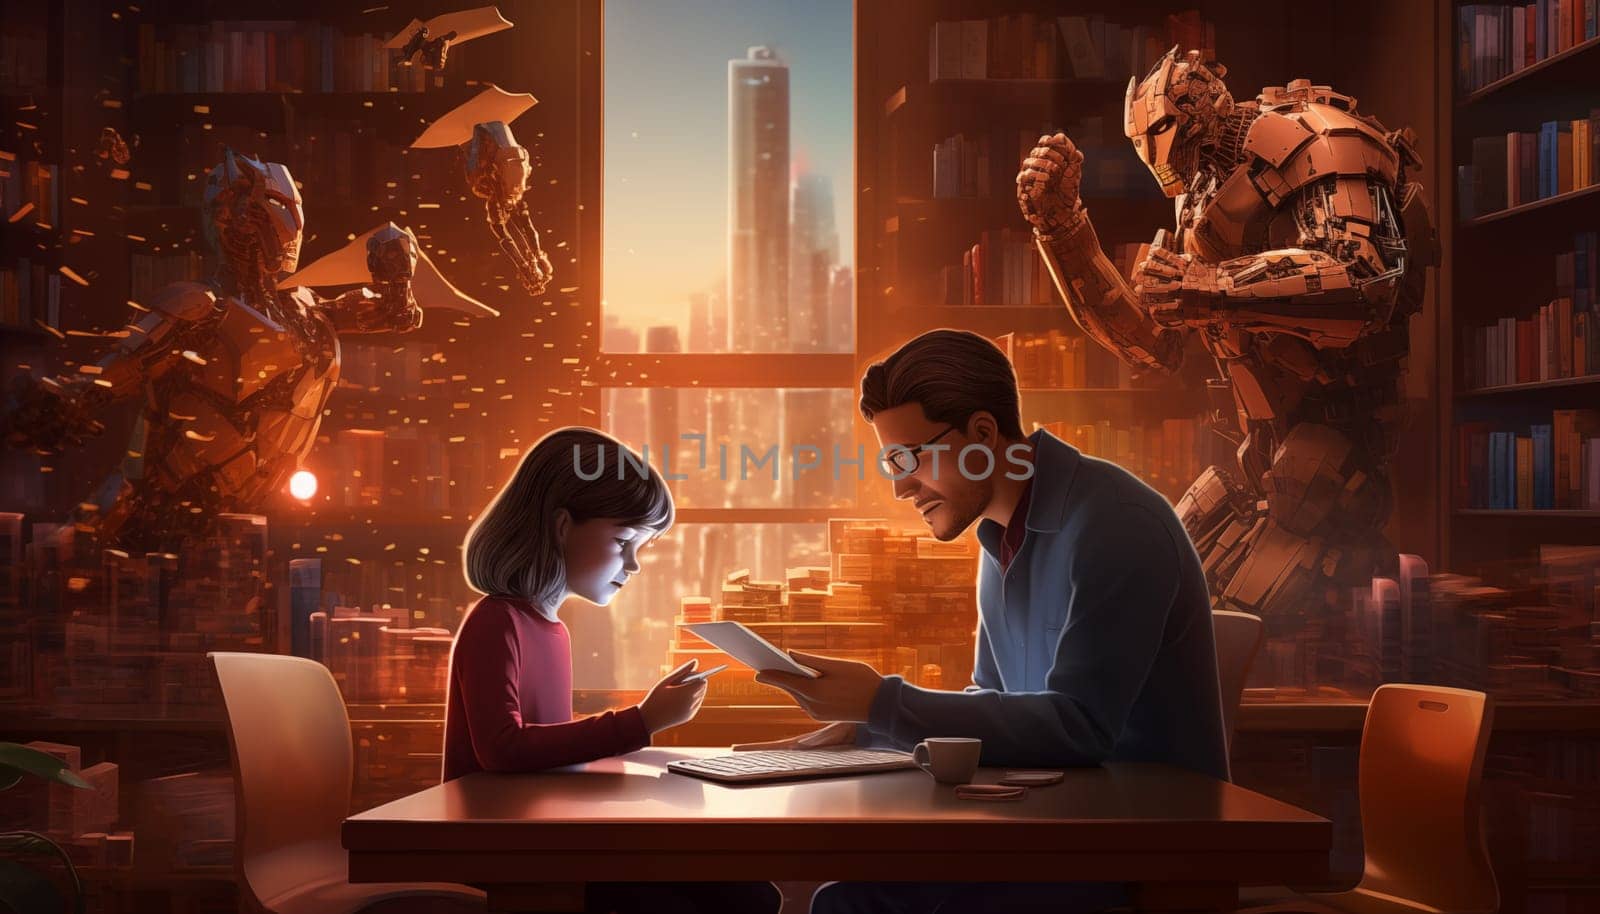 A man and a little girl sit together at a library table, engrossed in their work. The man, an AI assistant, supports and guides the child as they tackle their homework and navigate the wonders of knowledge.